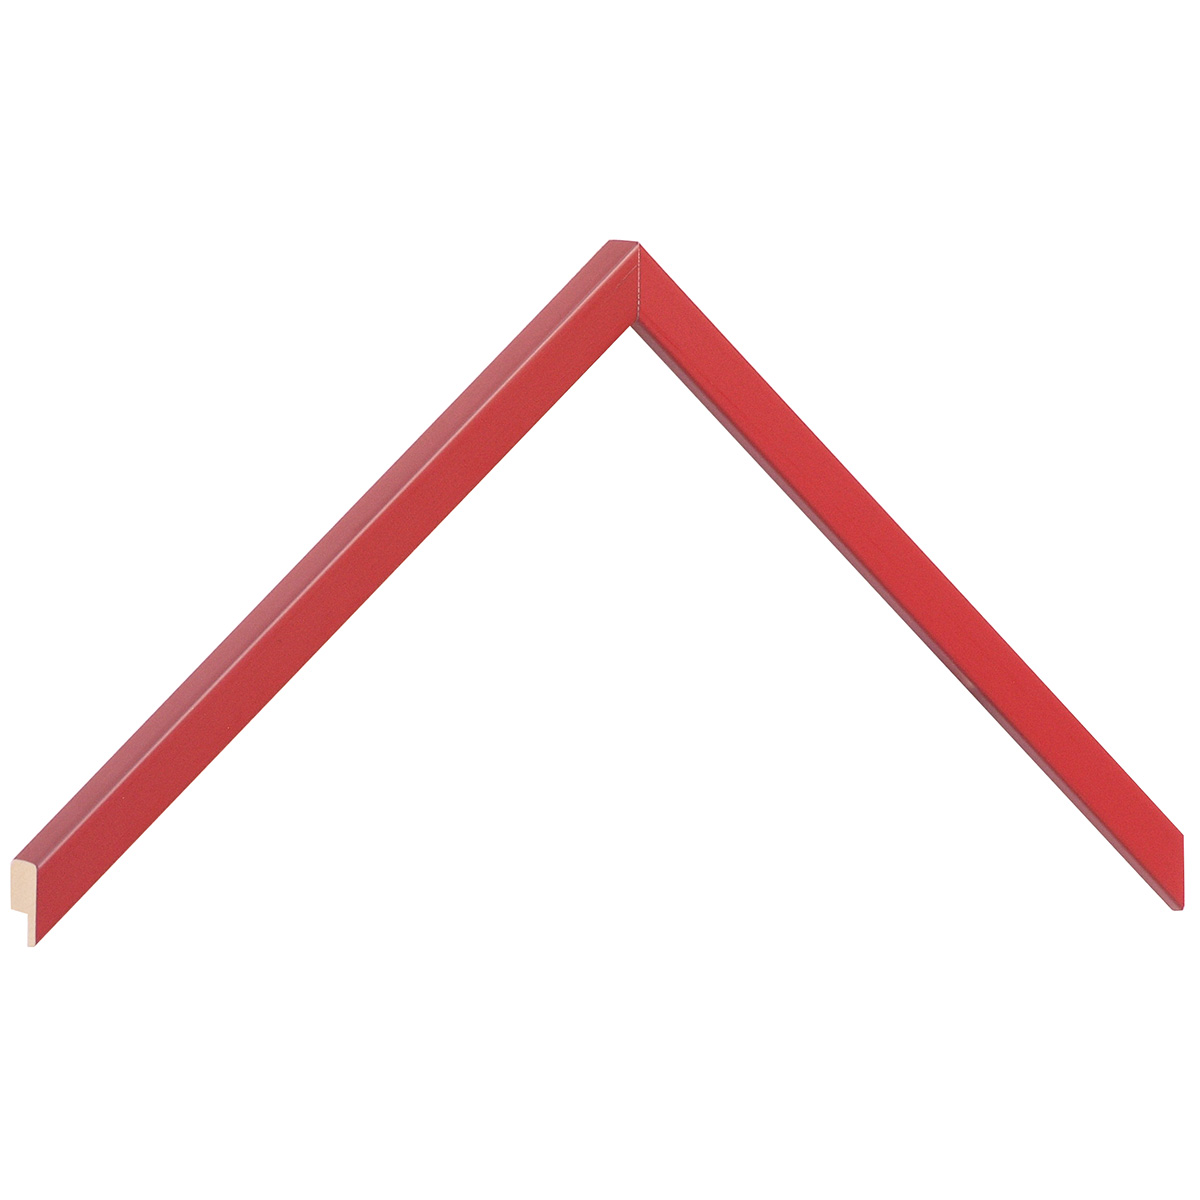 Moulding ramin width 10mm height 14 - red - Sample